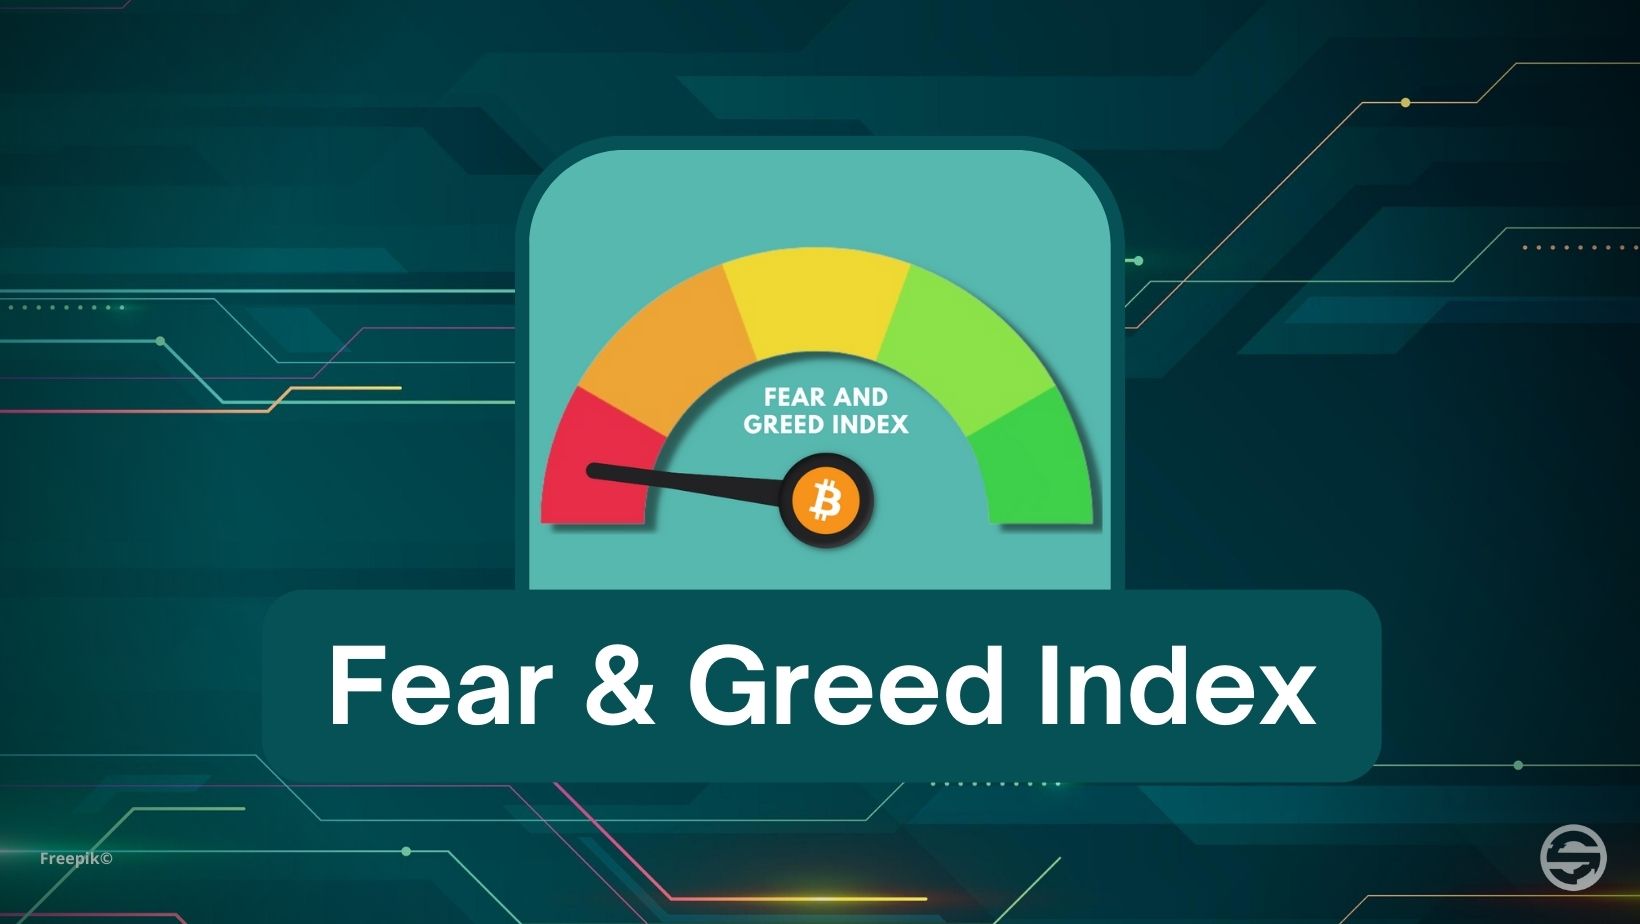 The Fear and Greed Index in detail